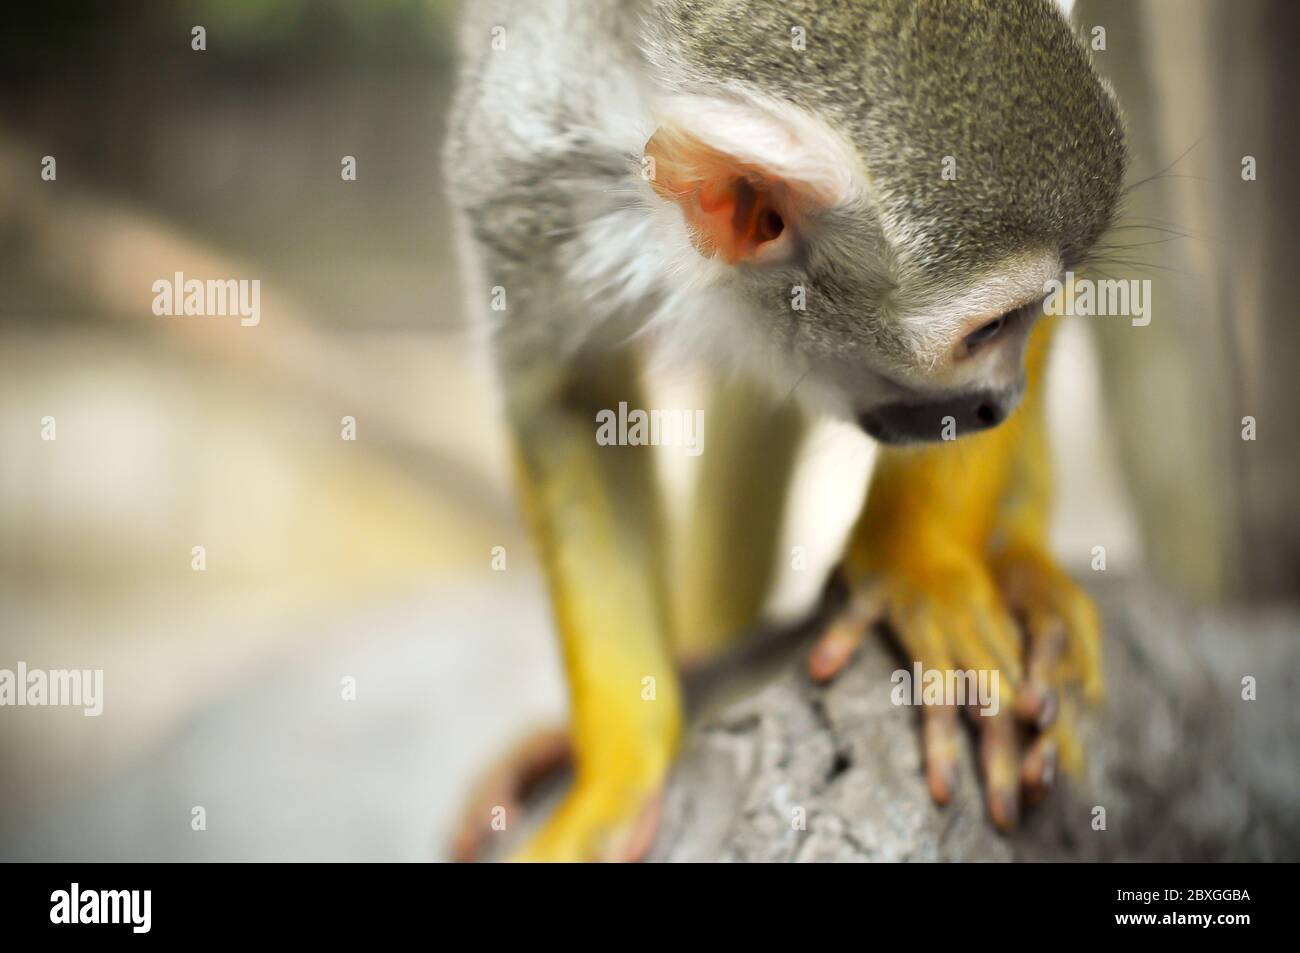 Squirrel monkeys live in the tropical forests of Central and South America. Stock Photo